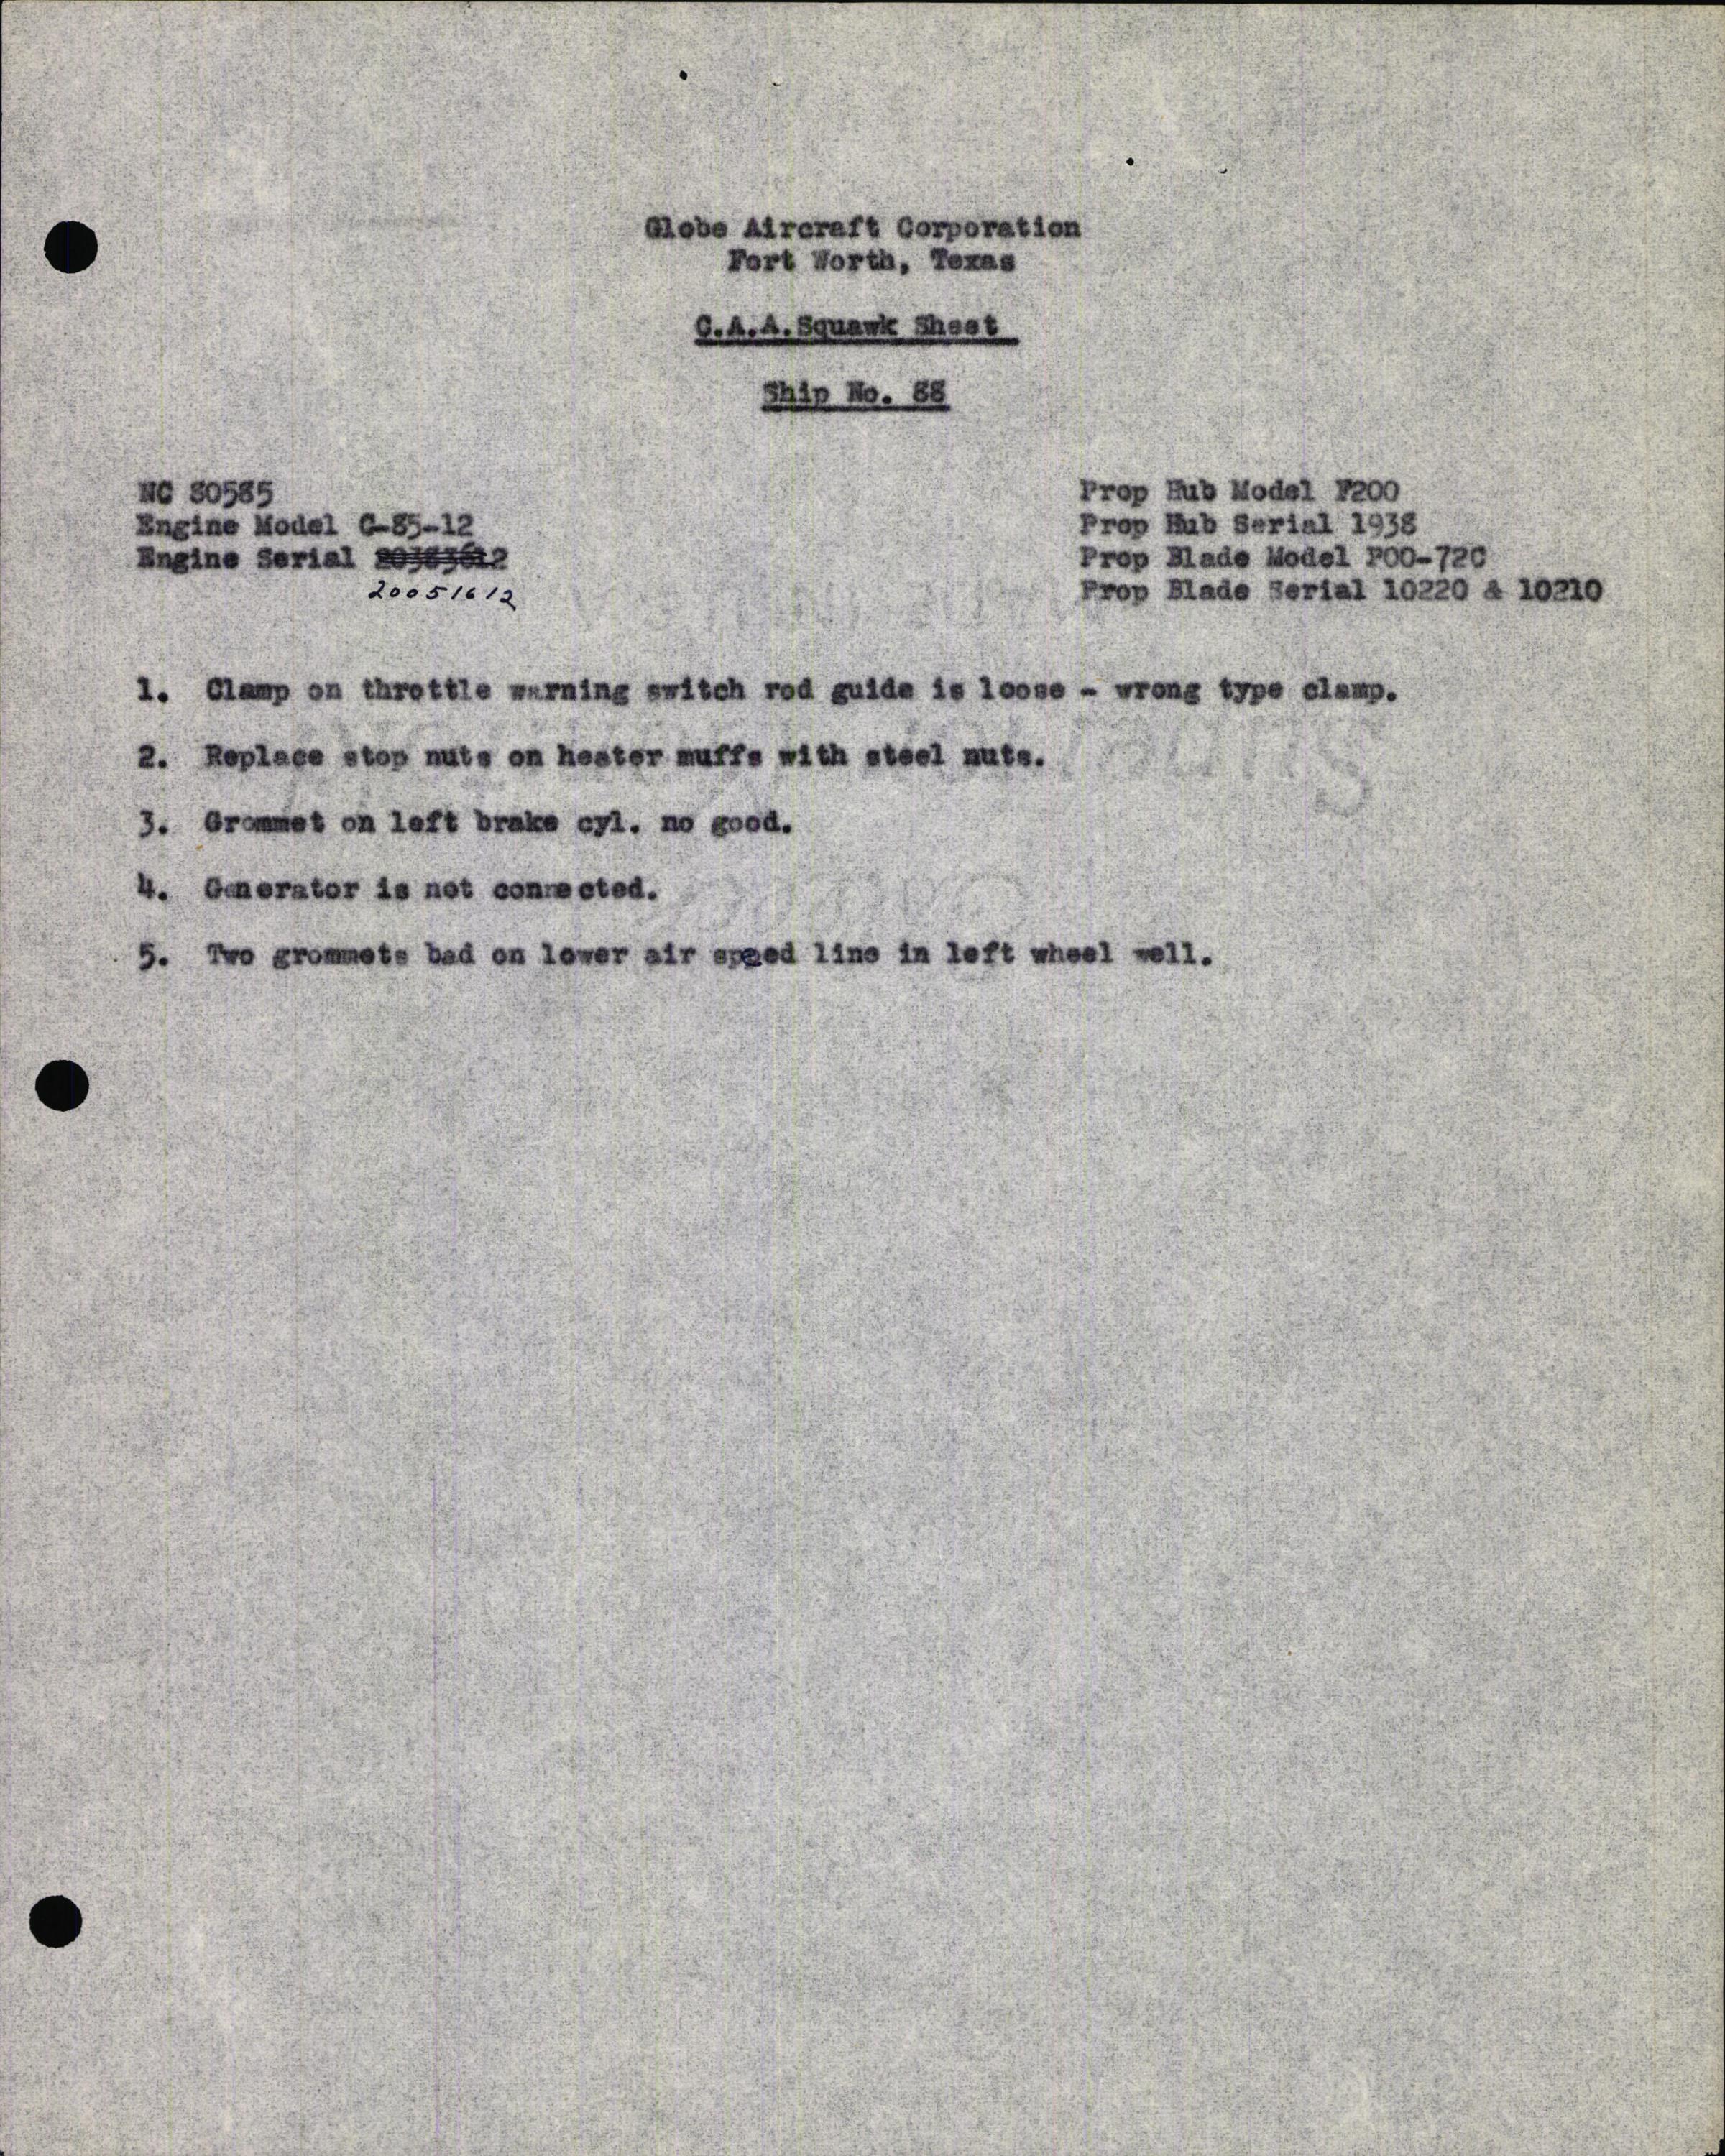 Sample page 13 from AirCorps Library document: Technical Information for Serial Number 88